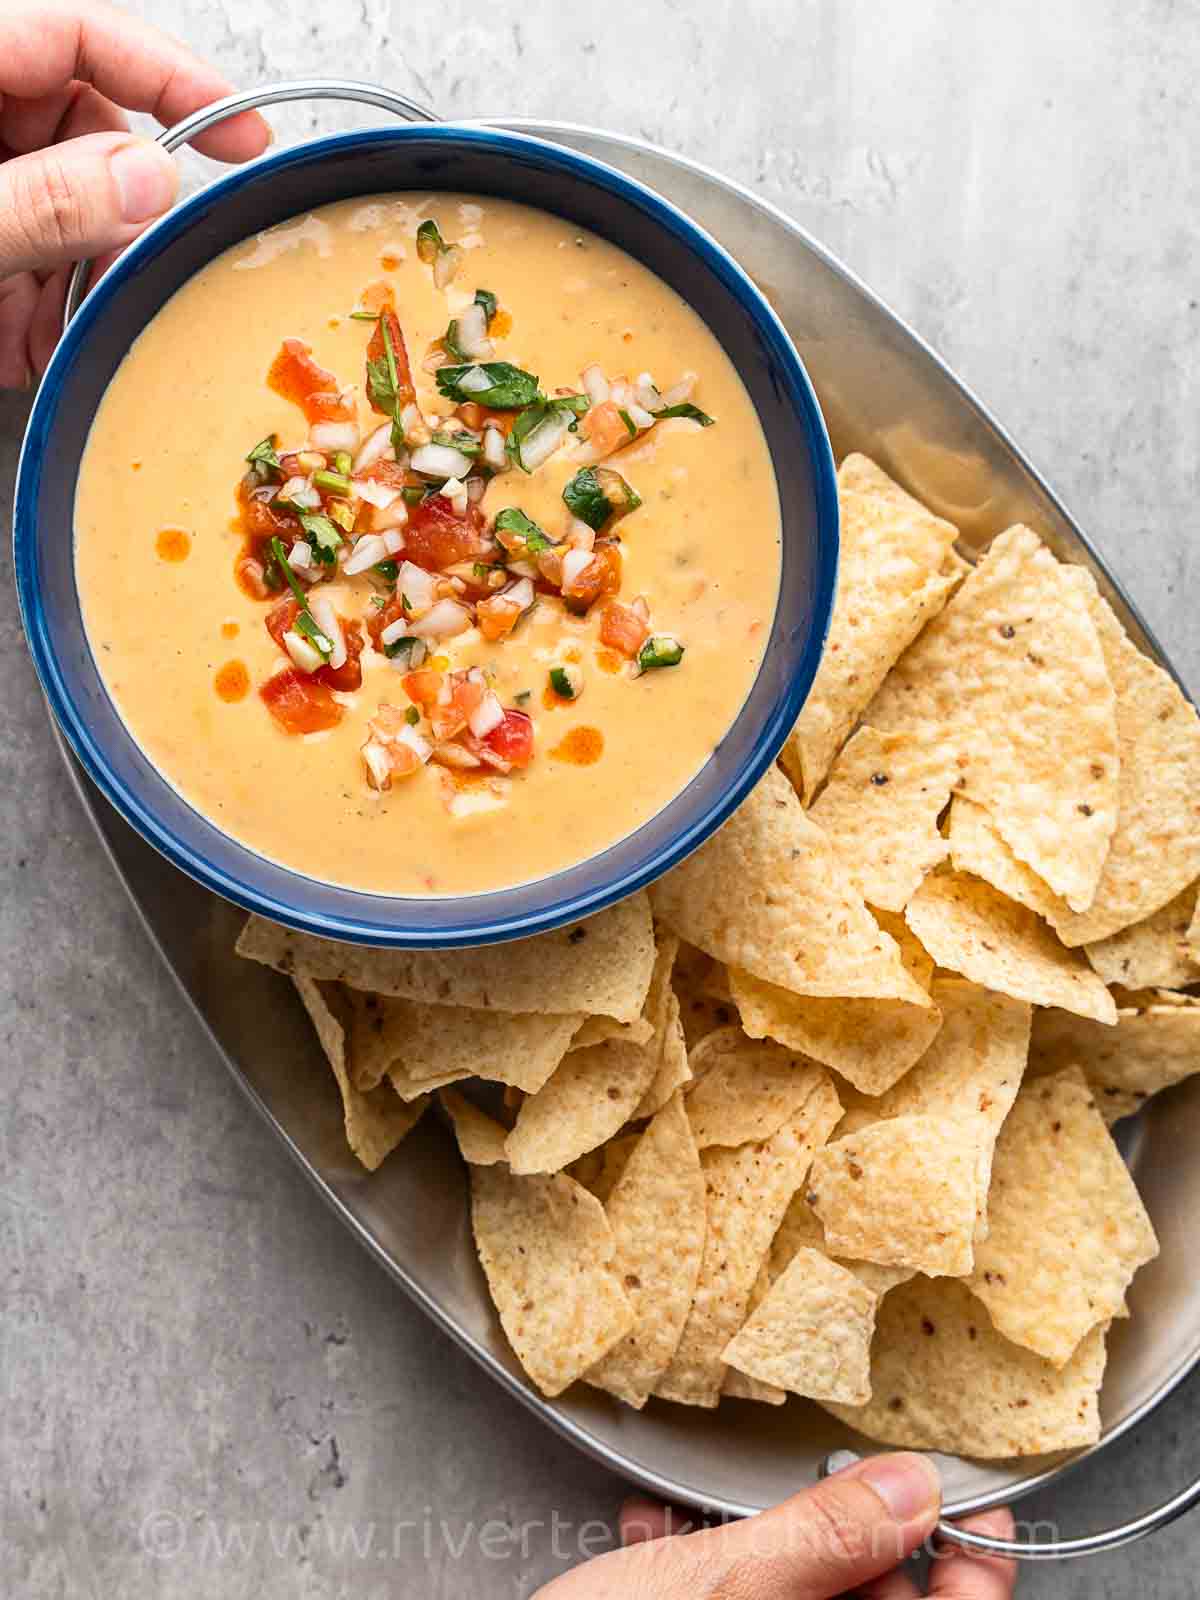 Nacho cheese sauce Mexican style served on a platter with nachos.